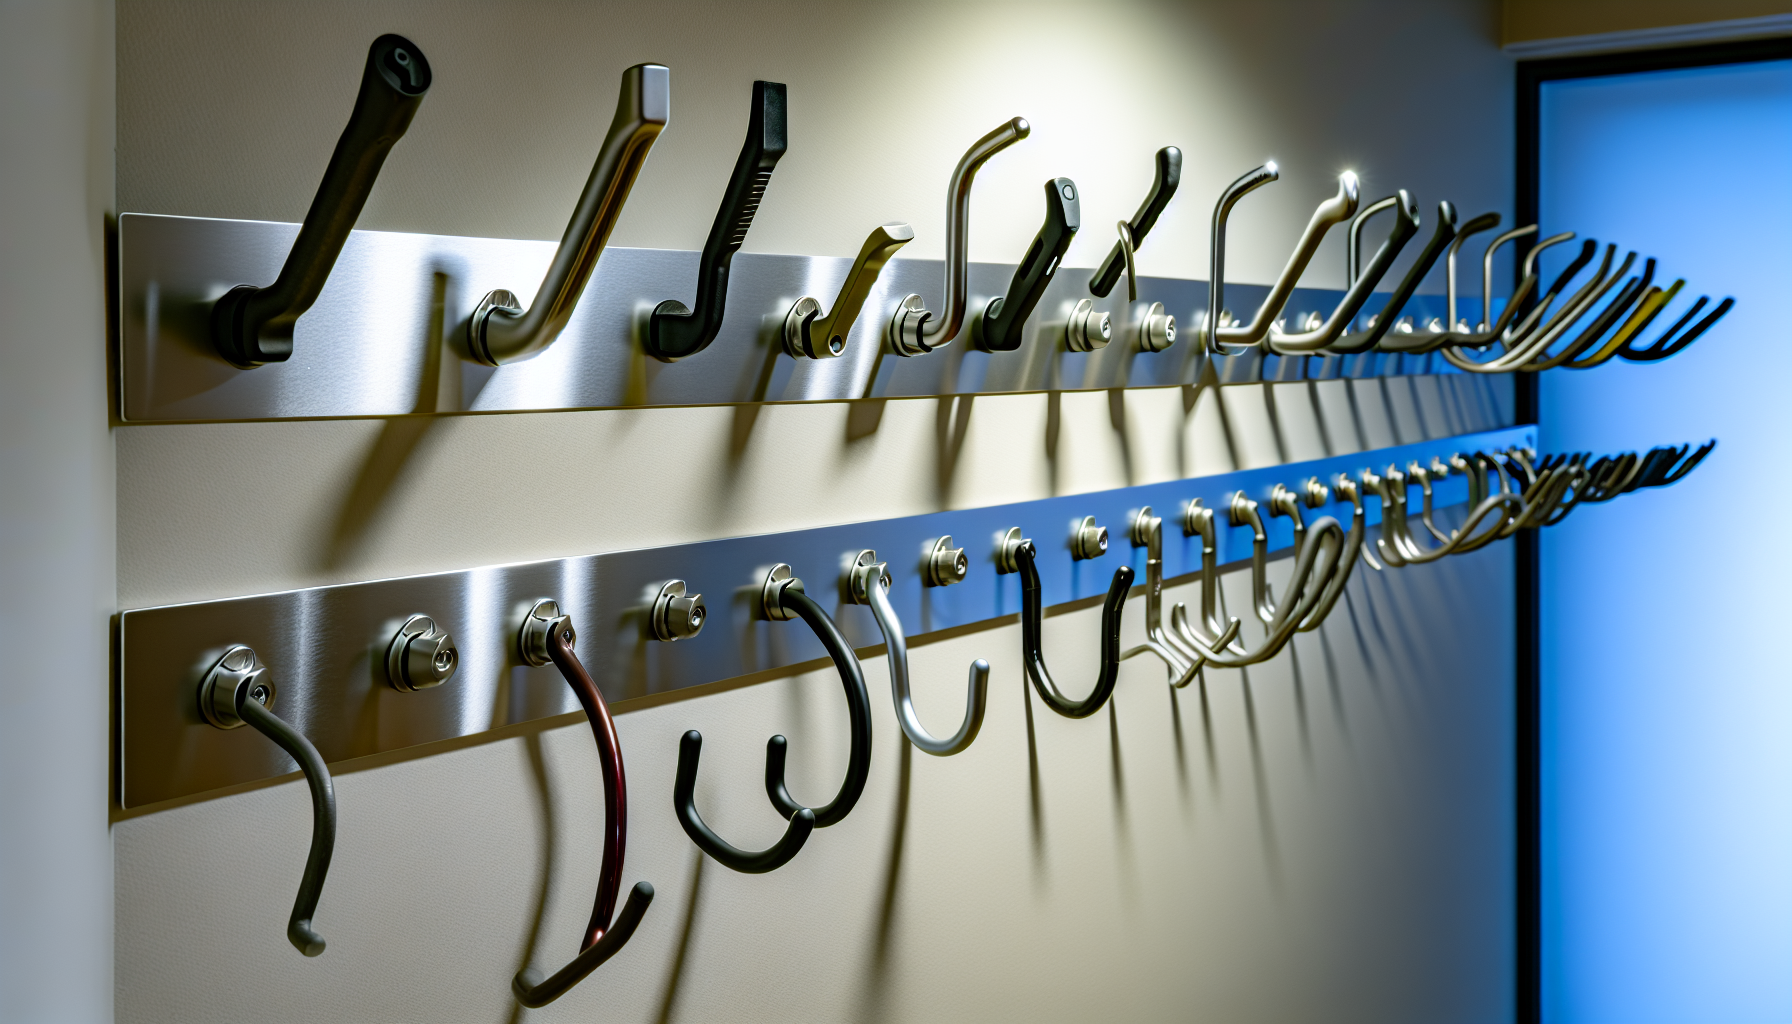 Different types of bike hooks on display